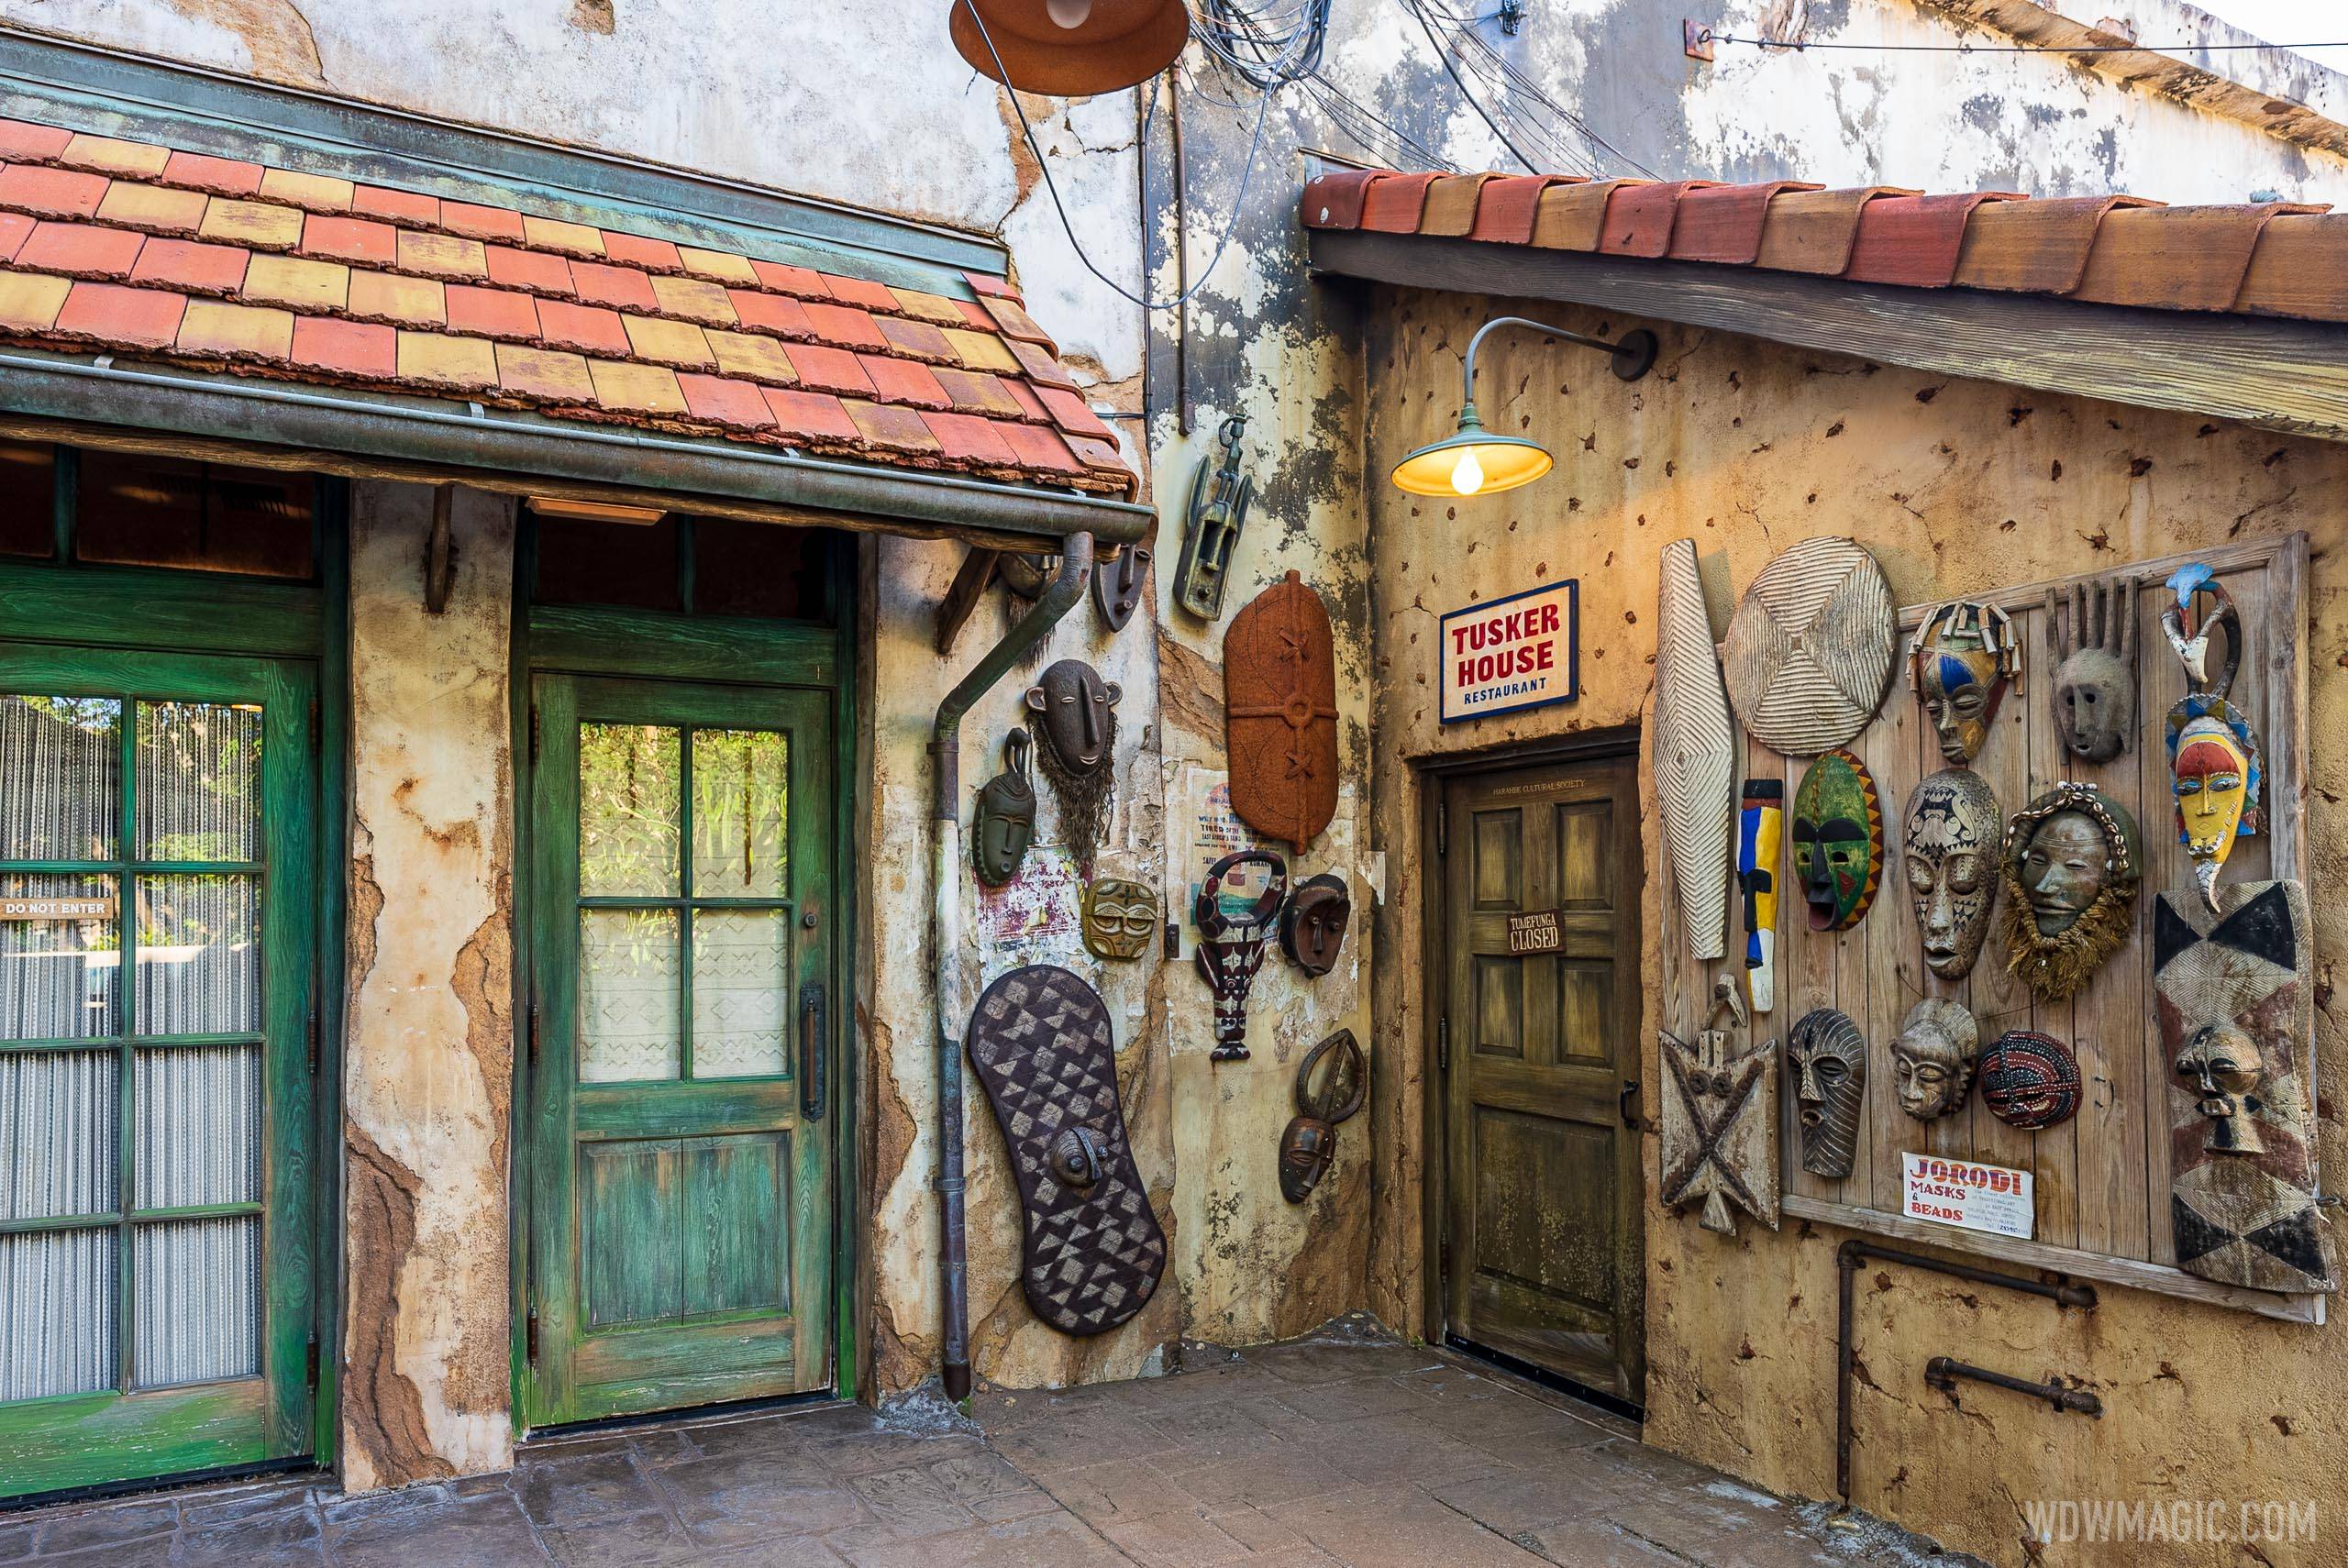 Donald’s Dining Safari Lunch opens at Tusker House in December